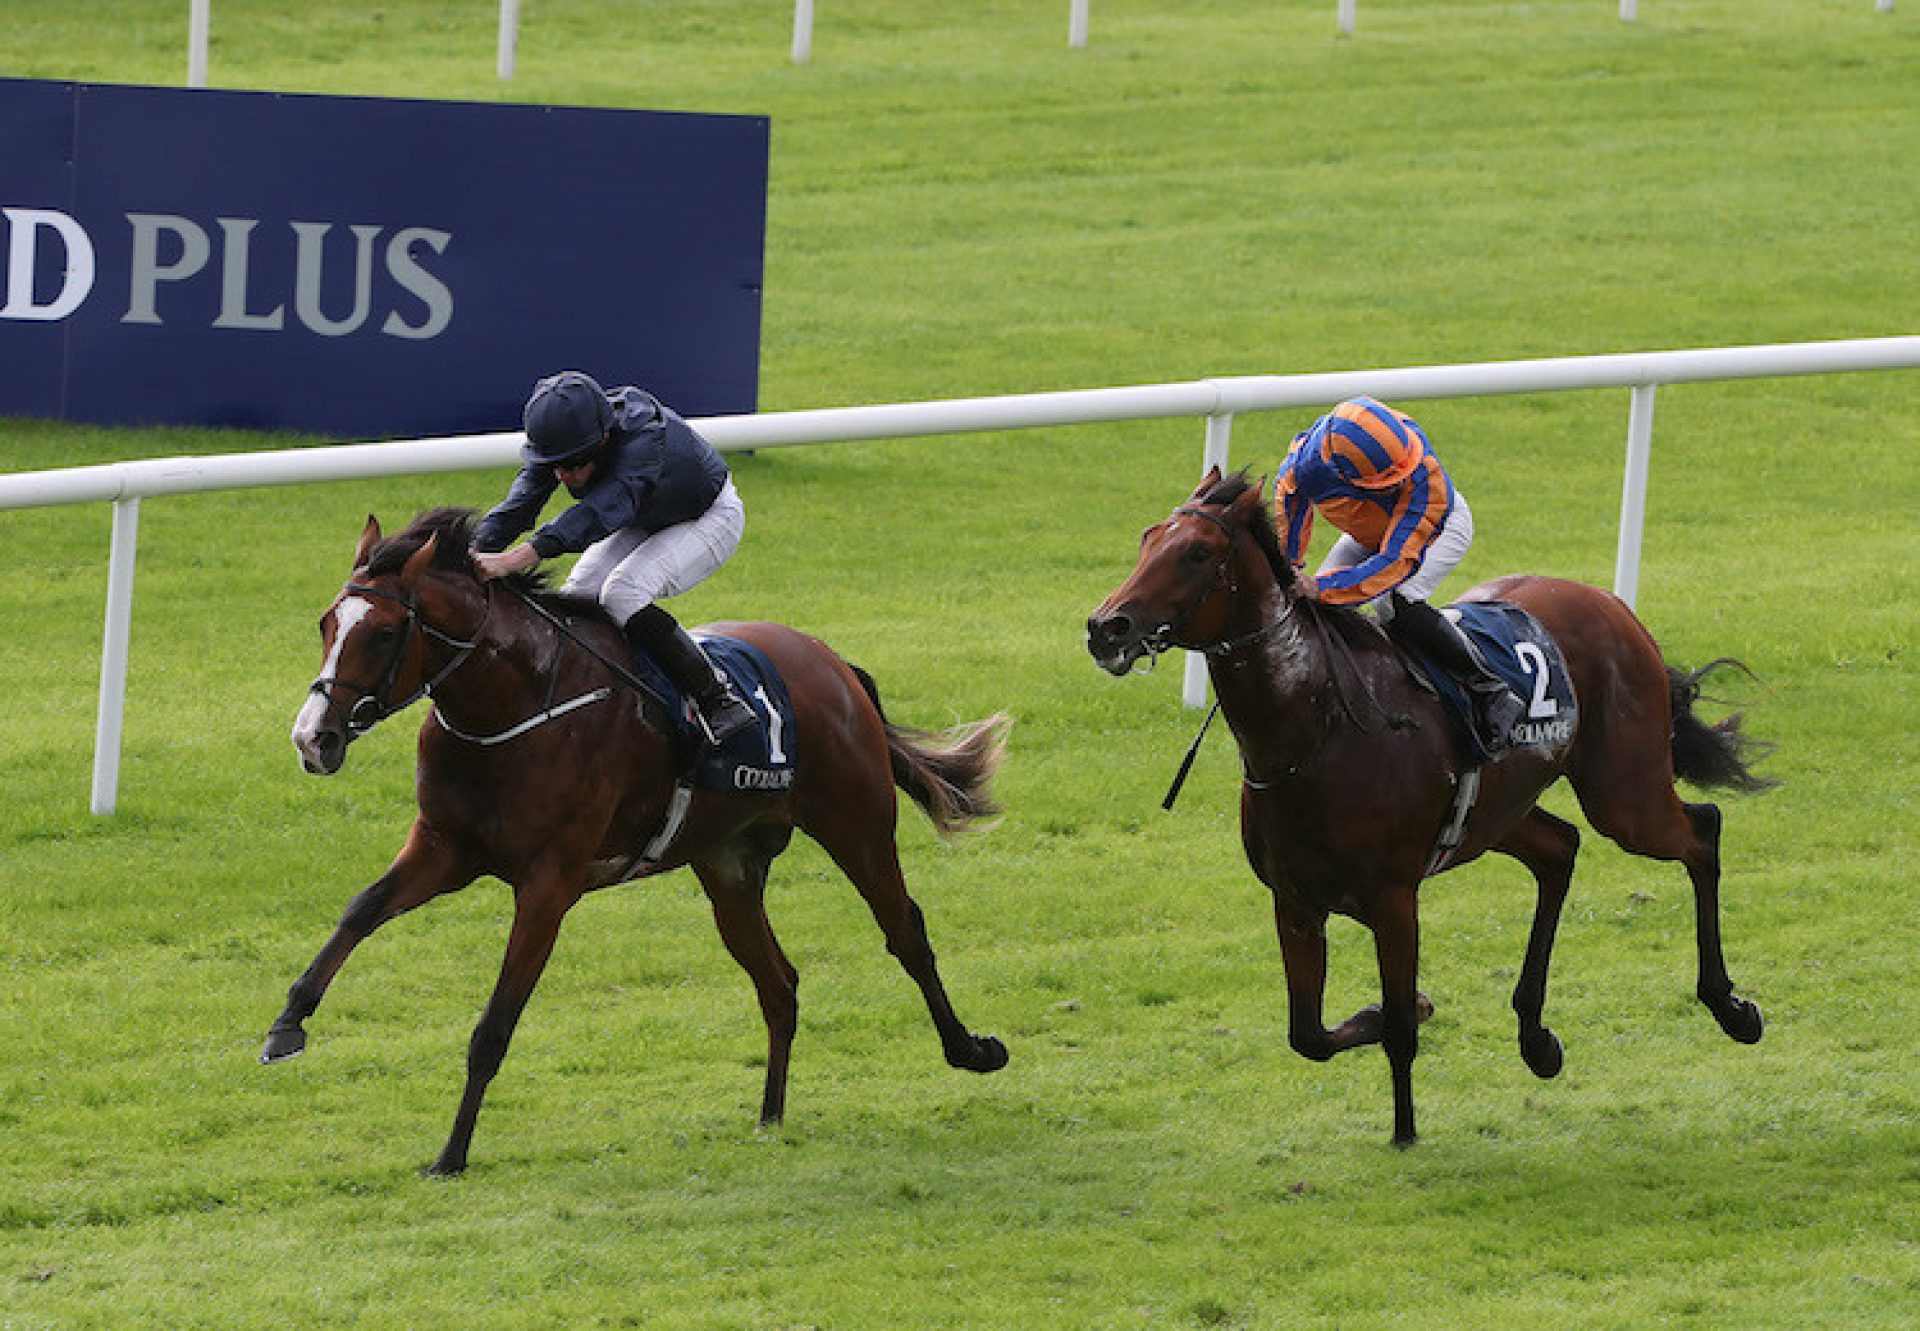 Anthony Van Dyck (Galileo) winning the G2 Futurity Stakes at the Curragh